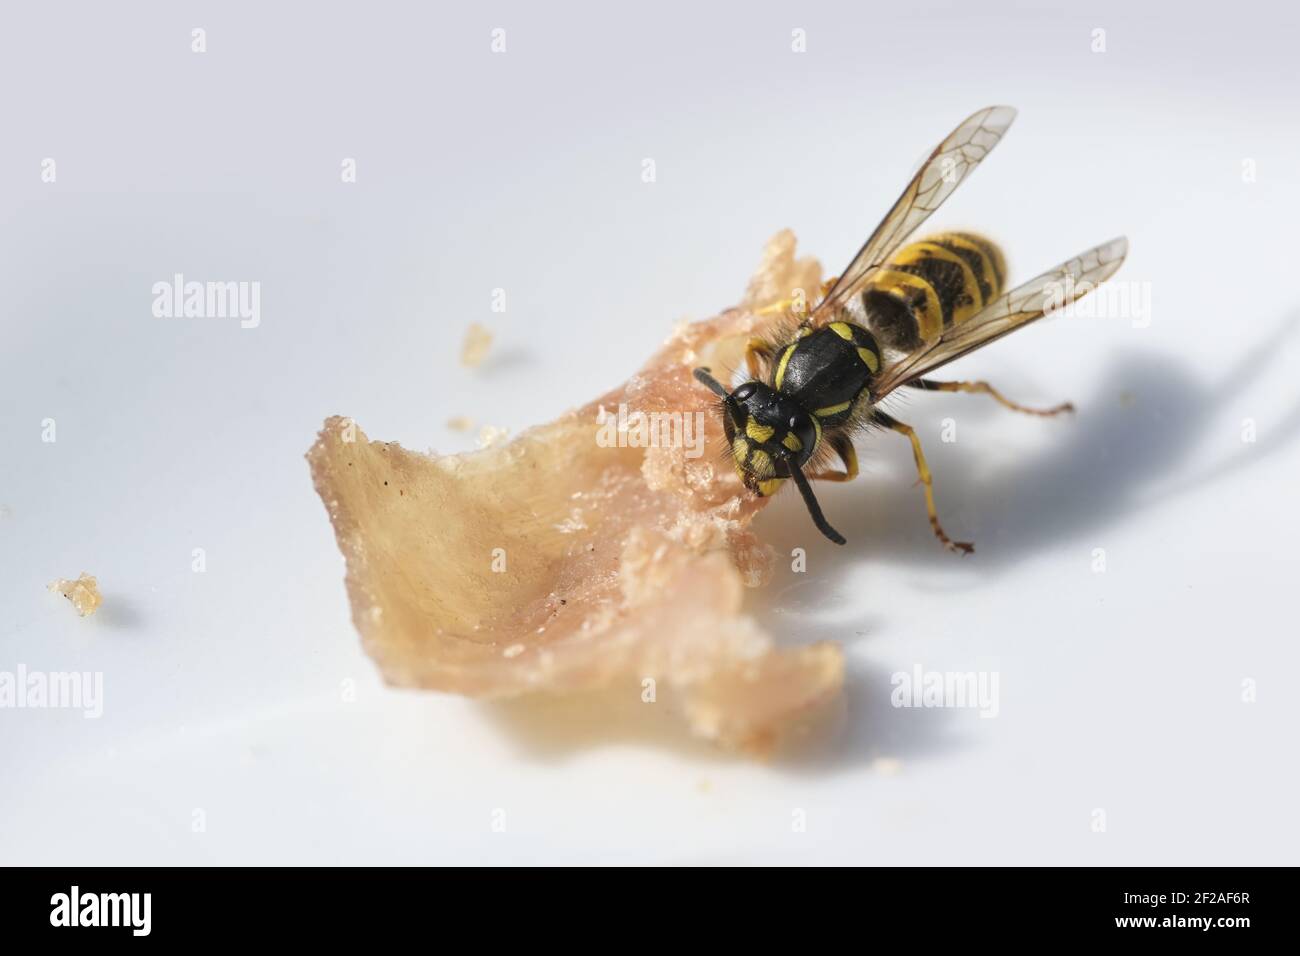 Wasp is eating ham on a white plate, in summer nuisance of wasps can be dangerous around outdoor sources of food, macro shot, copy space, selected foc Stock Photo